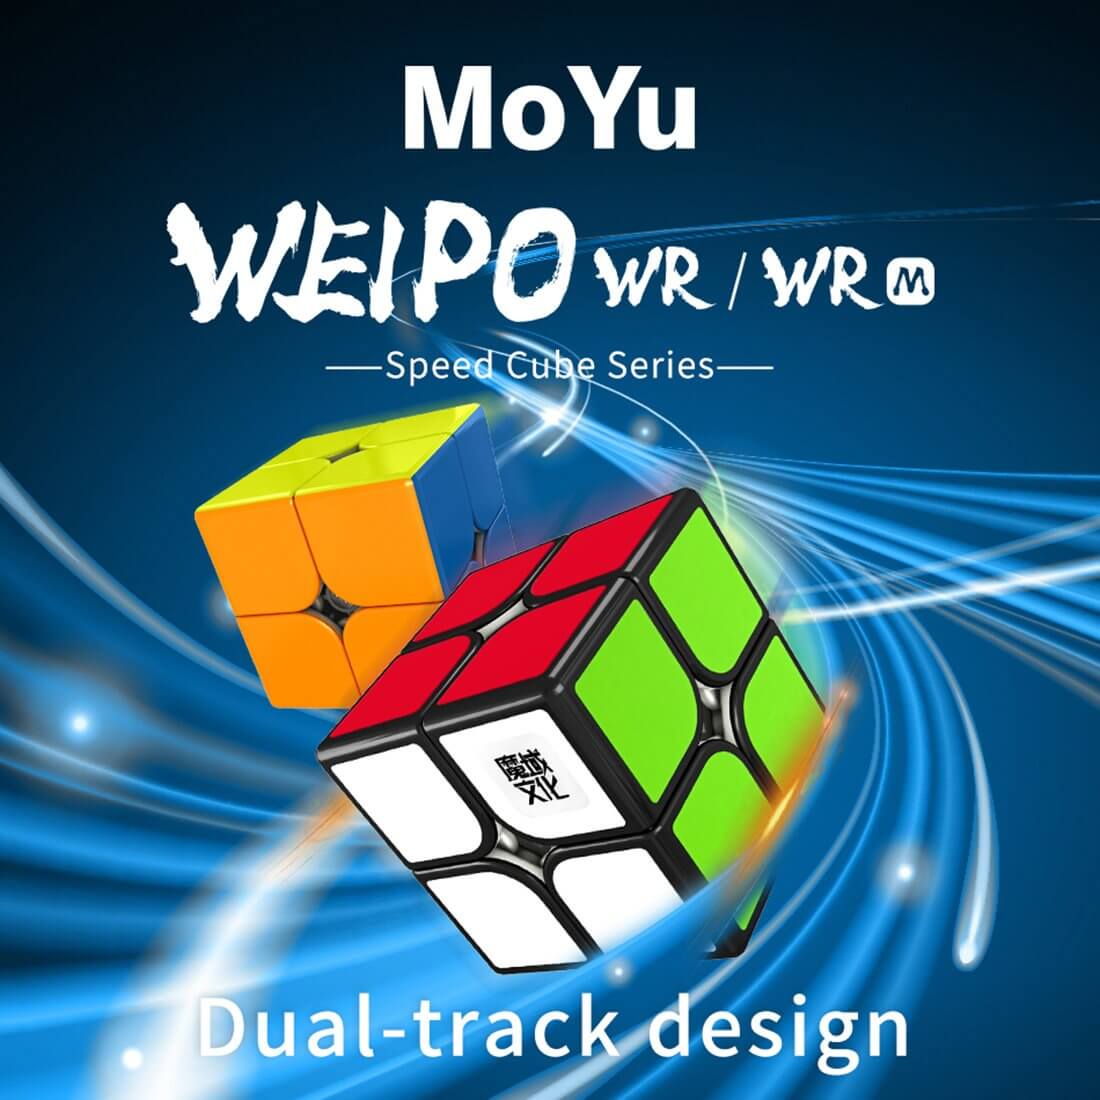 Weipo WR/WRM 2x2